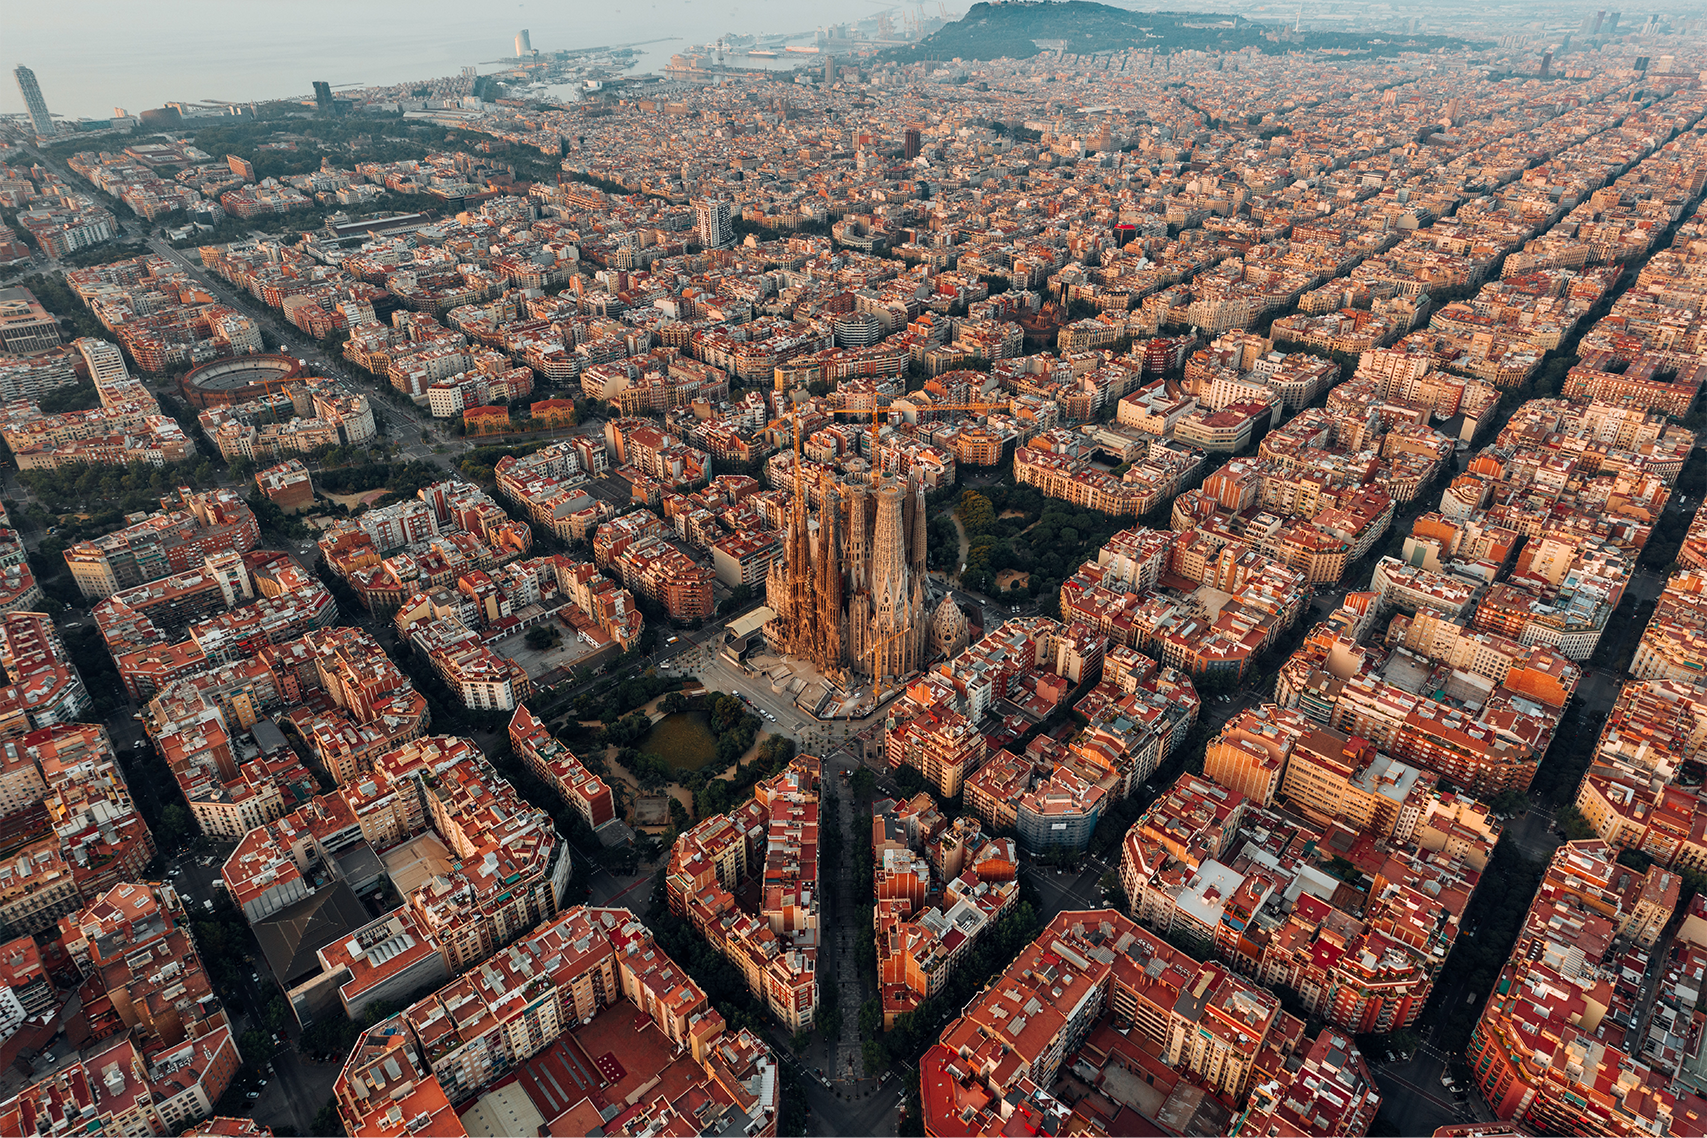 Sky high view of Barcelona and their grid style city